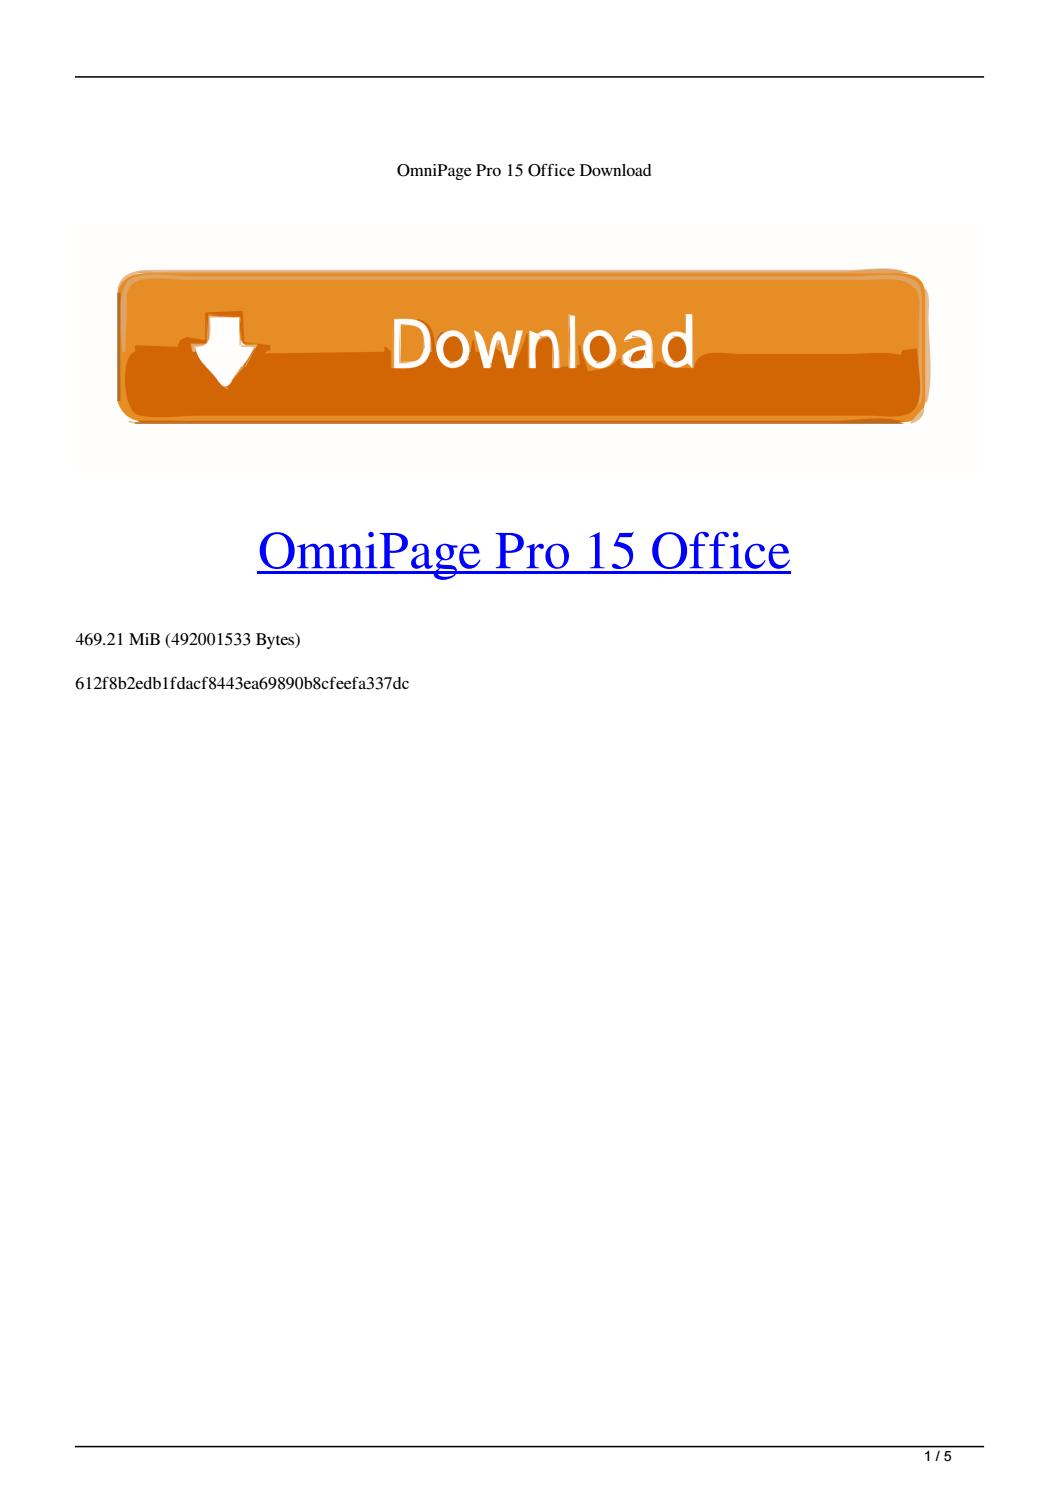 scansoft omnipage pro